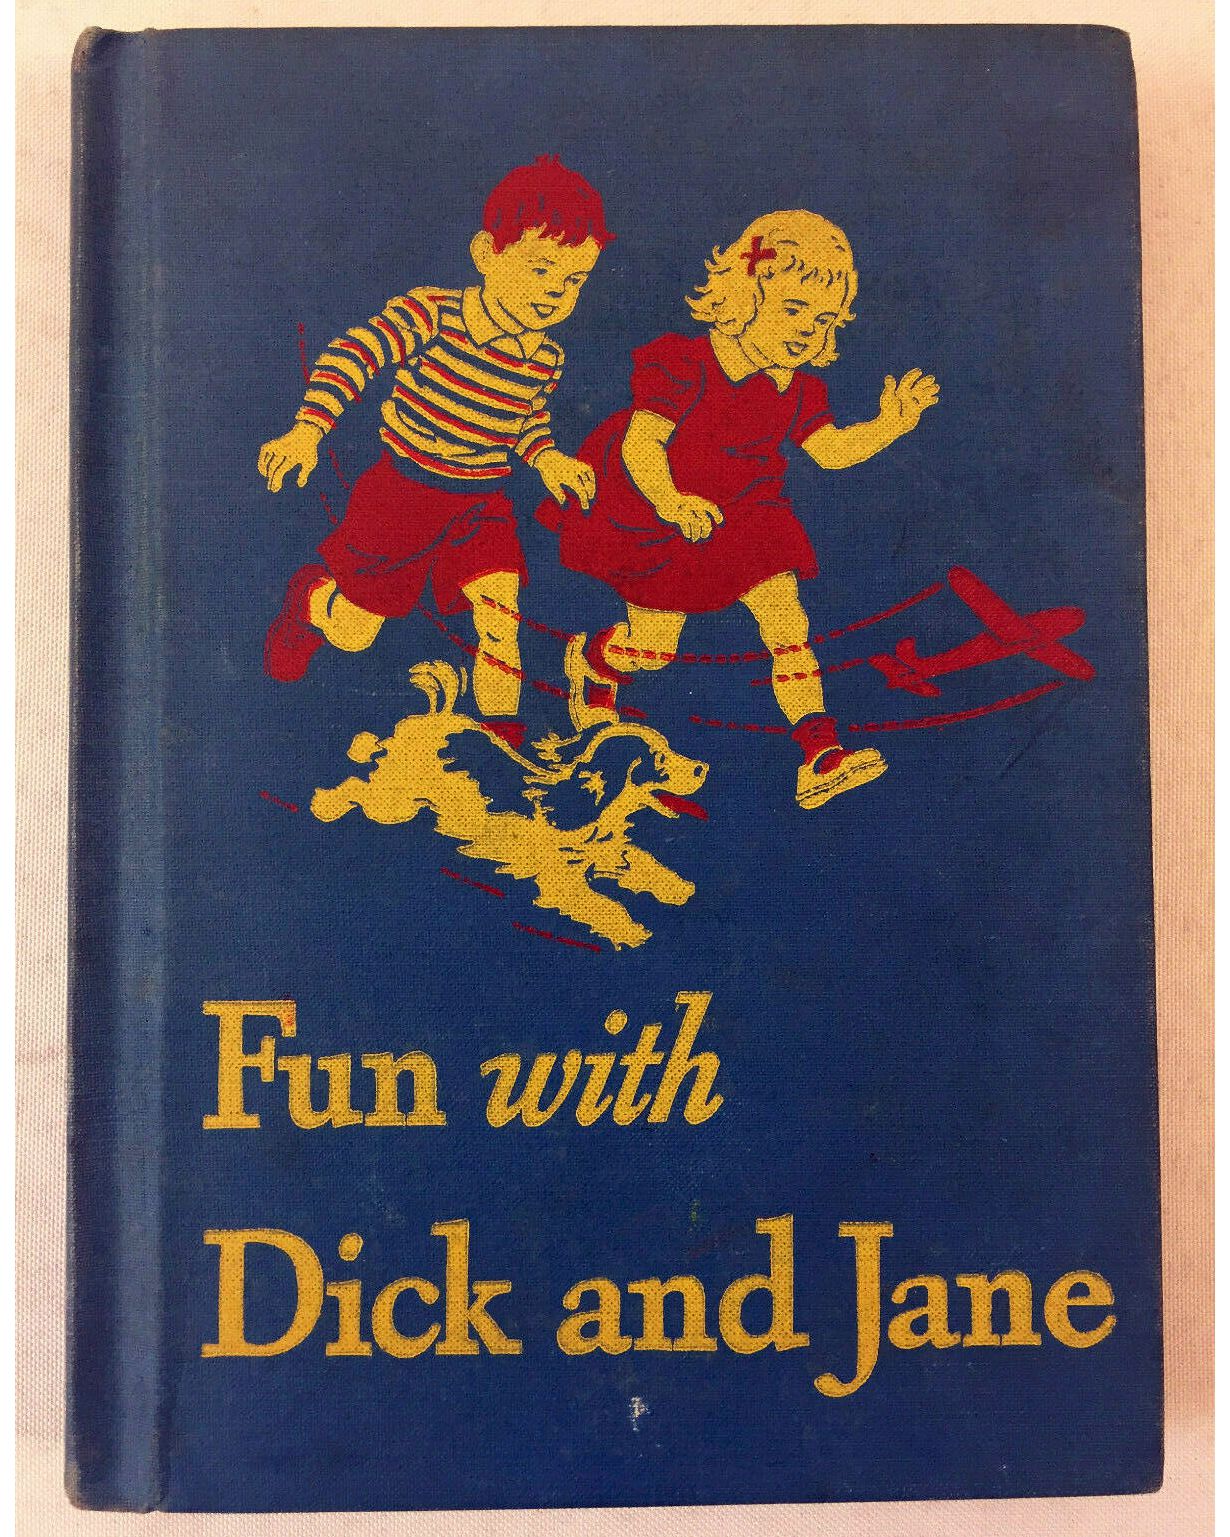 These iconic early readers were a staple of classrooms as early as the '30s, and by 1970, a staggering <a href="https://mentalfloss.com/article/68475/15-fun-facts-about-dick-and-jane">85 million first-graders</a> had plowed through the repetitive texts, according to Mental Floss. But they gradually fell out of favor for two main reasons: First, at many schools, phonics replaced the whole-word reading method that the books used; and second, "Dick and Jane" simply didn't reflect increasingly diverse student bodies. Today, if you've just gotta "see Jane run," <a href="https://www.amazon.com/Go-Read-Dick-Jane/dp/0448434059/ref=as_li_ss_tl?ie=UTF8&linkCode=ll1&tag=msnshop-20&linkId=3f5f1fc06cb8a1ba0a6fa9975ded22c6&language=en_US">they're easily tracked down on Amazon</a>, while pricier originals are all over eBay.